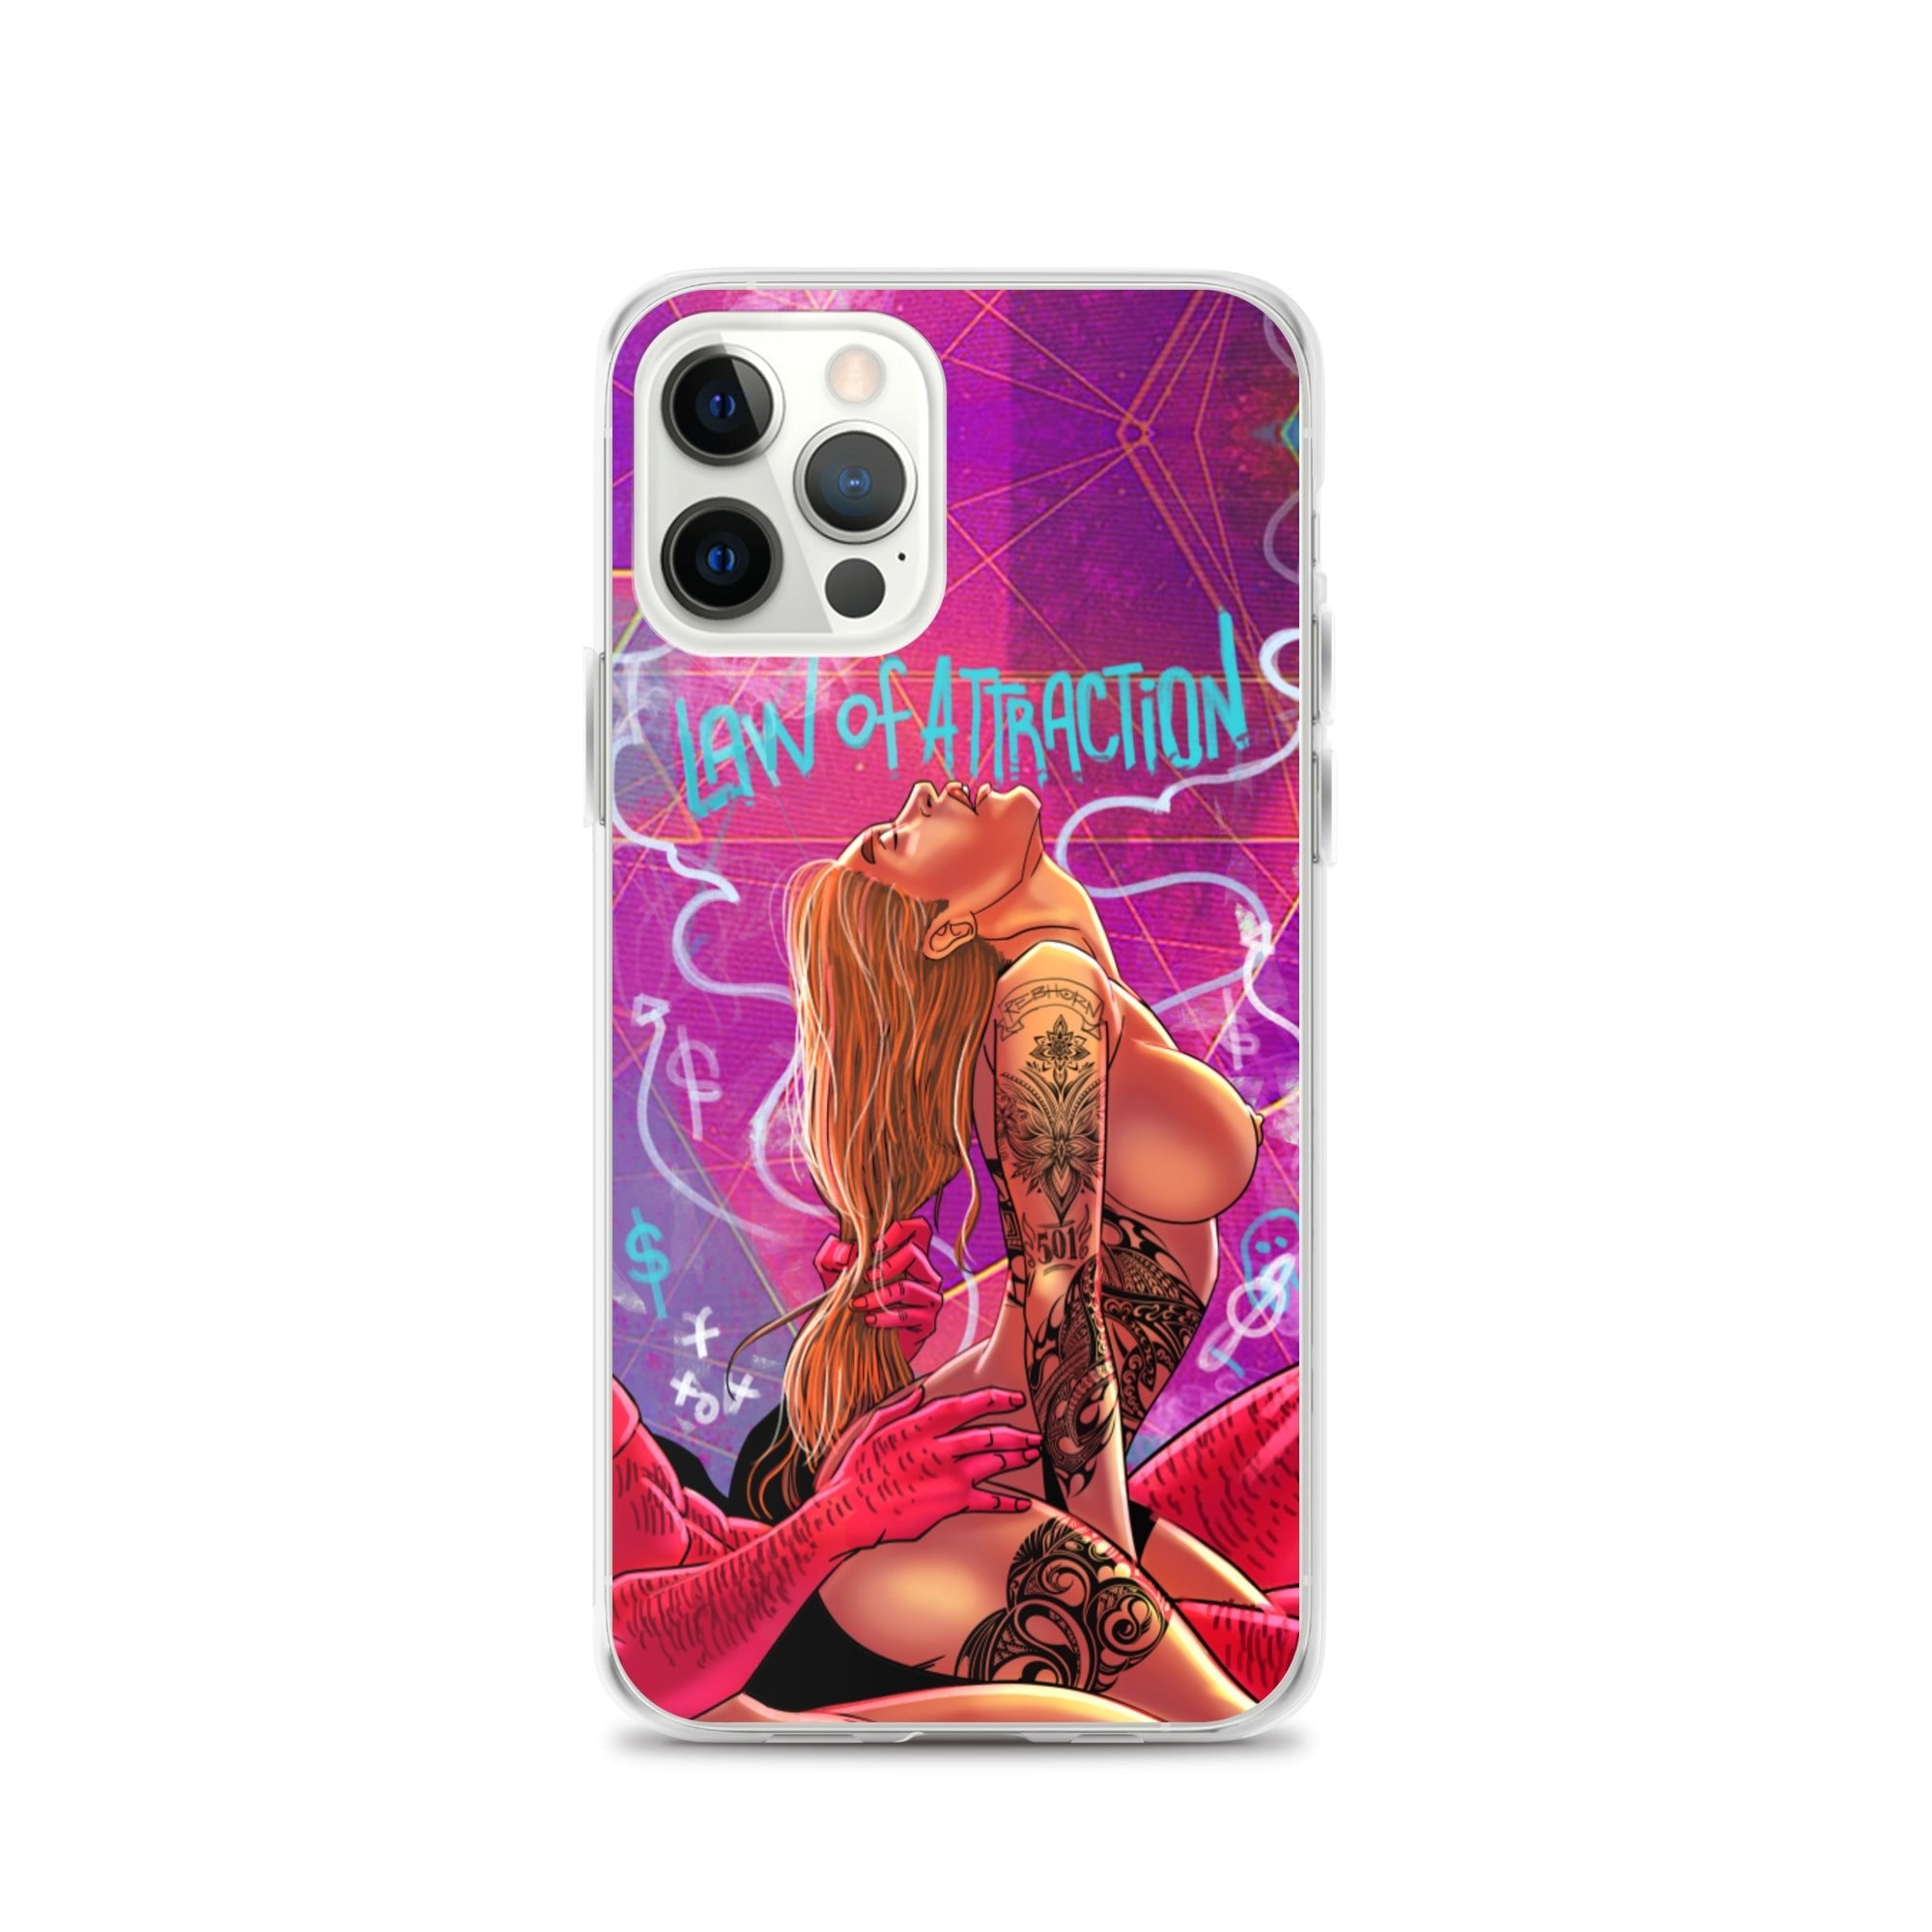 LAW OF ATTRACTION iPHONE CASE - REBHORN DESIGN